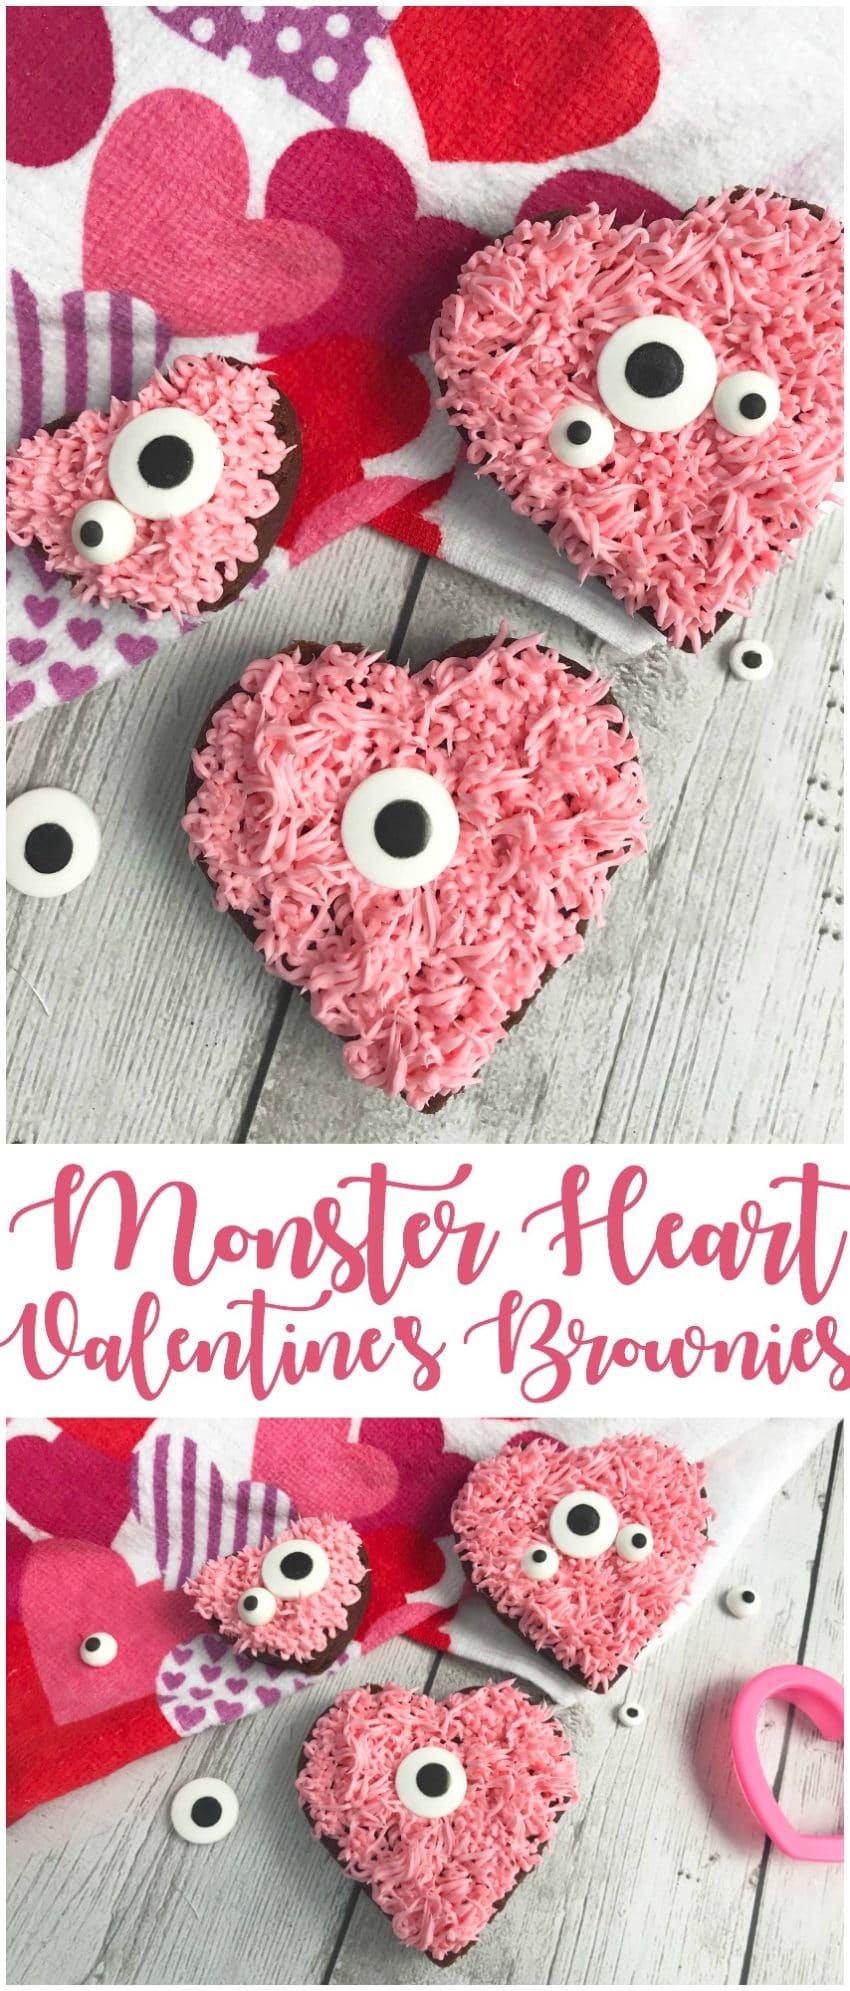 Valentine's monster heart brownies that are so cute, it's scary! These brownies are simple to make and fun to decorate!